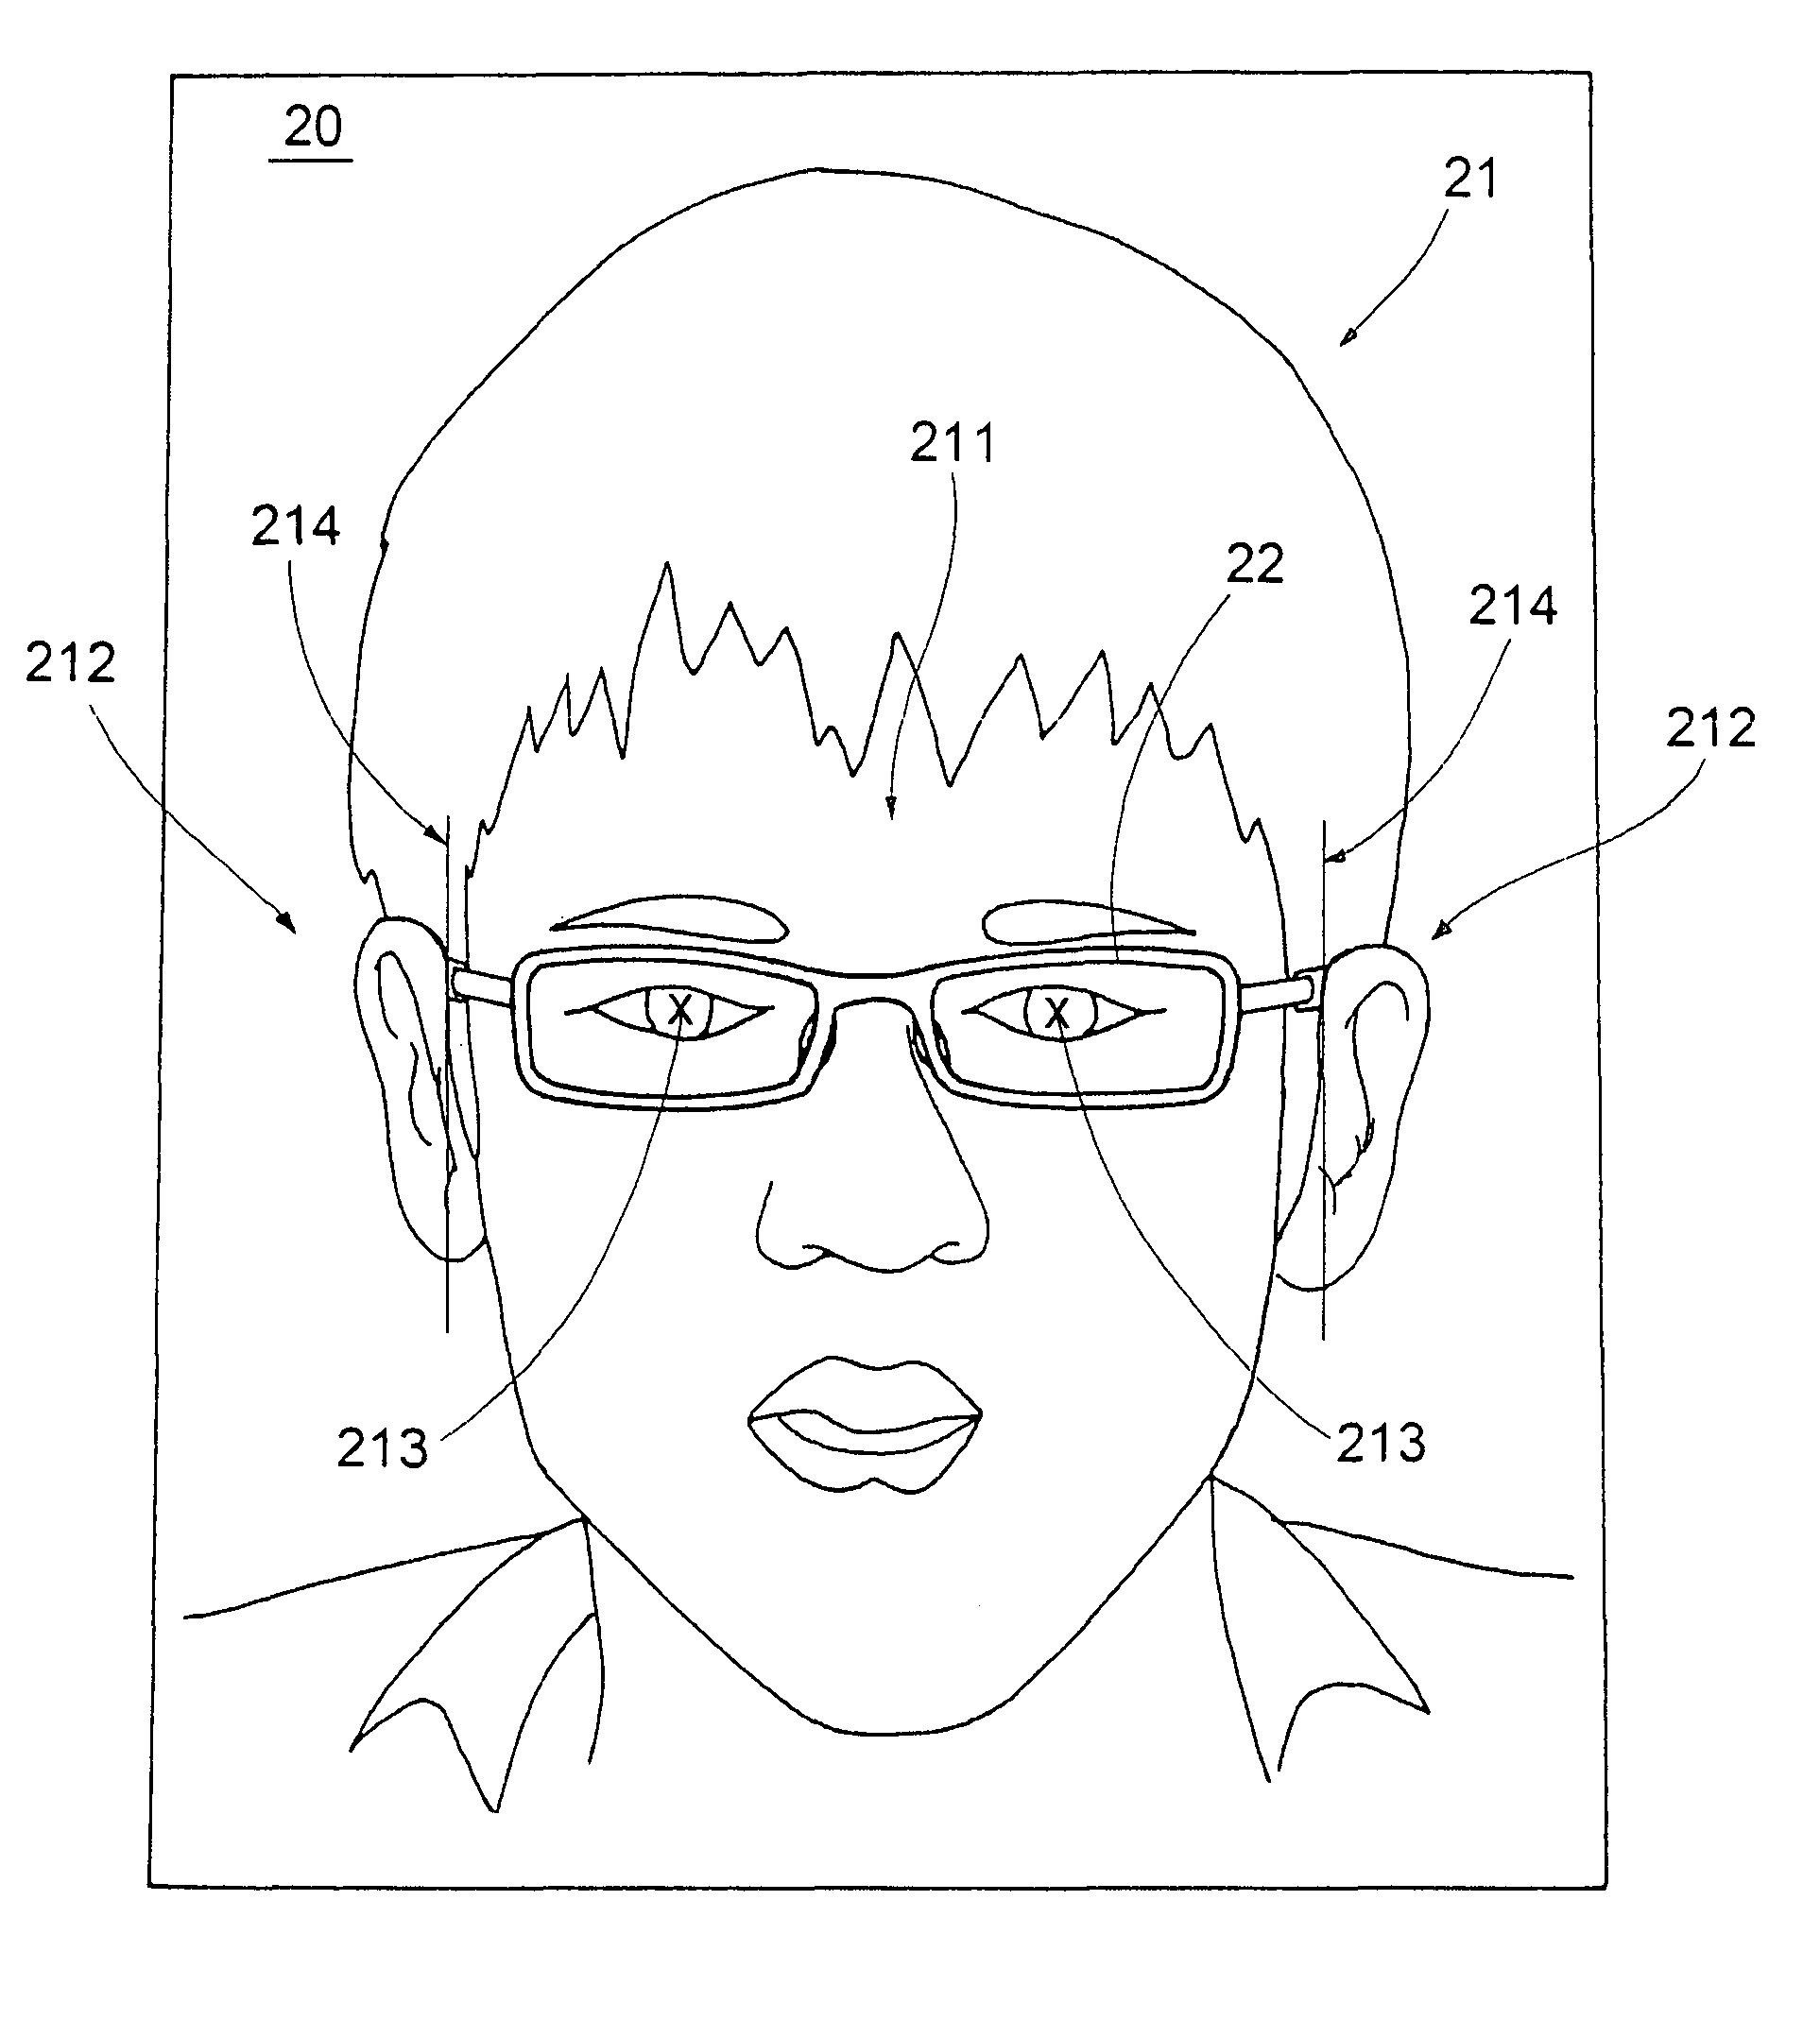 Test-wearing image producing method for personal products